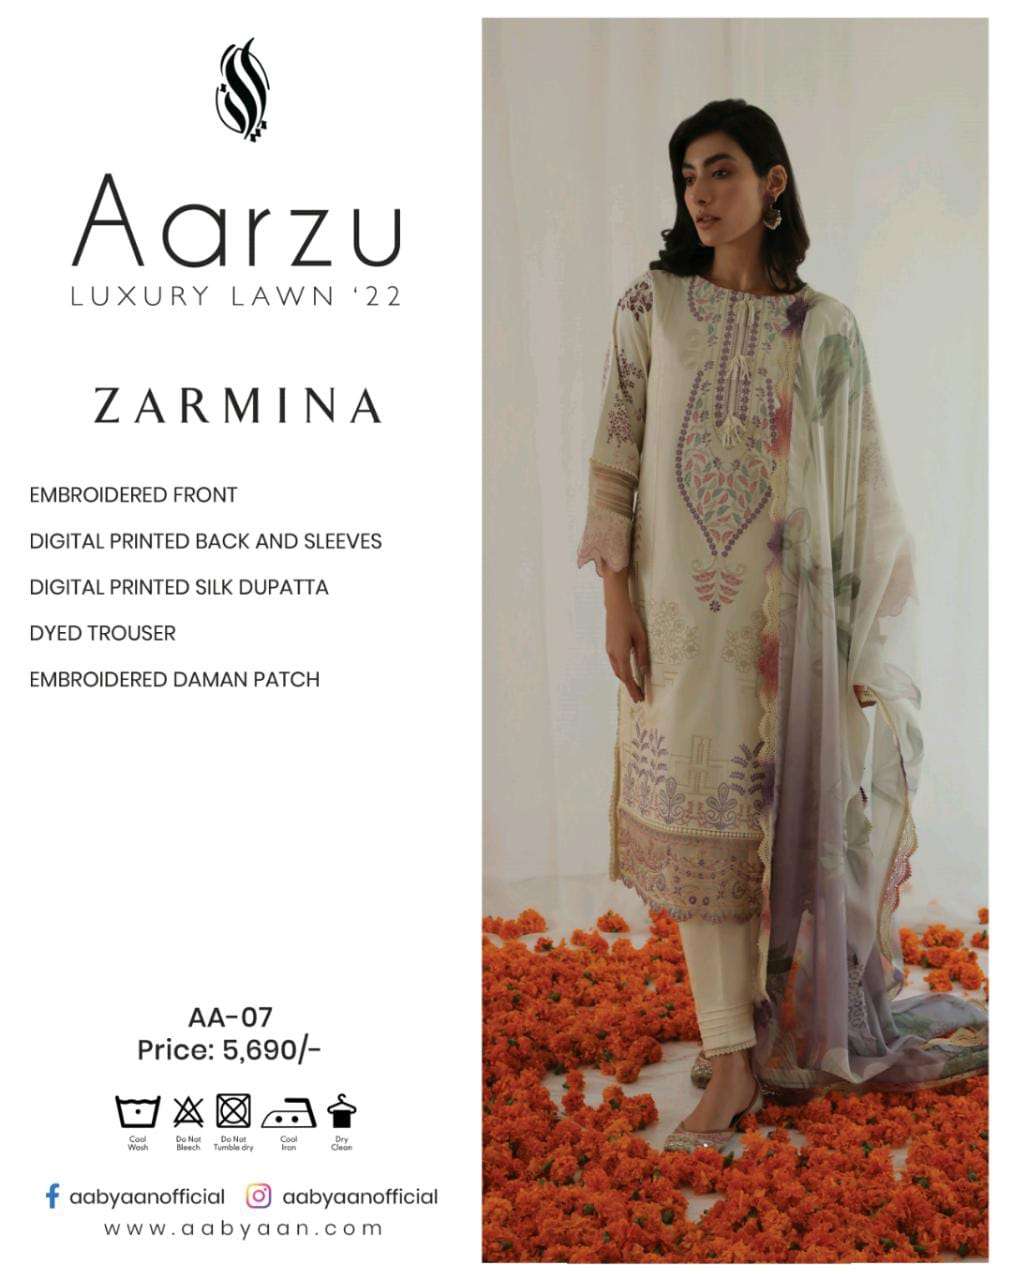 ORIGINIAL PAKISTANI AARZU LUXURY LAWN-22 BY AABHIYAN BEAUTIFUL PAKISTANI SUITS COLORFUL STYLISH FANCY CASUAL WEAR & ETHNIC WEAR DIGITAL PRINT/EMBROIDERED DRESSES AT WHOLESALE PRICE